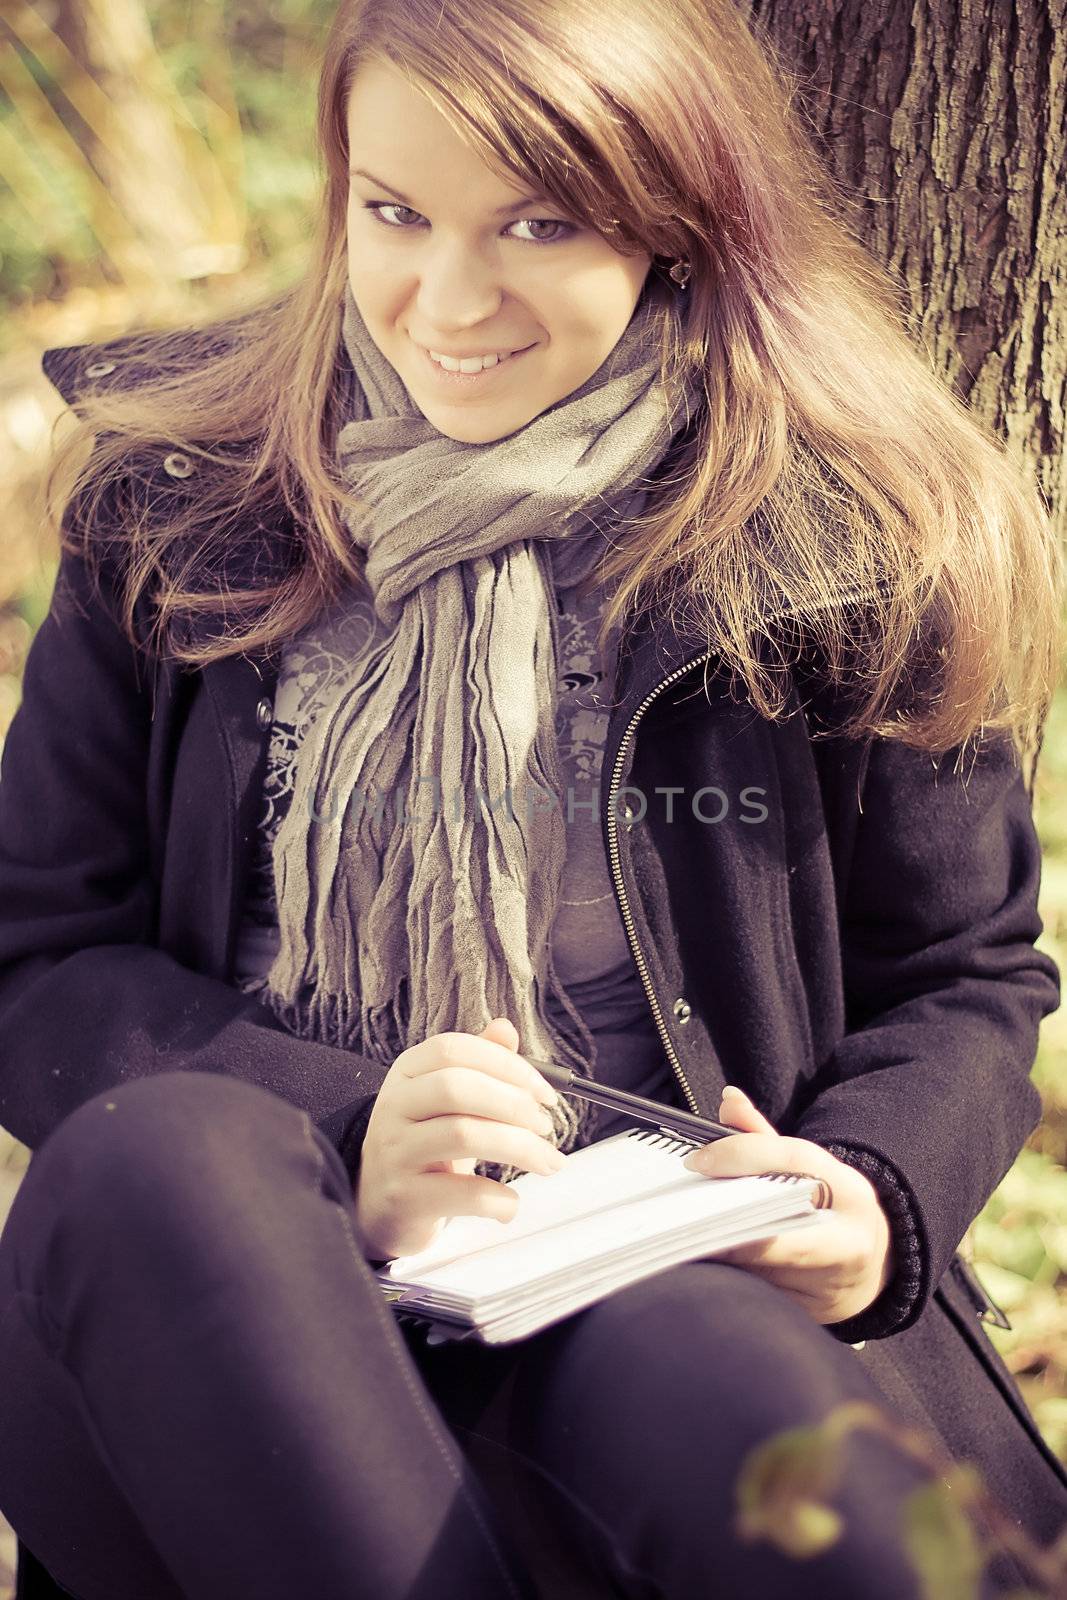 A girl writes on a pad in the park by victosha